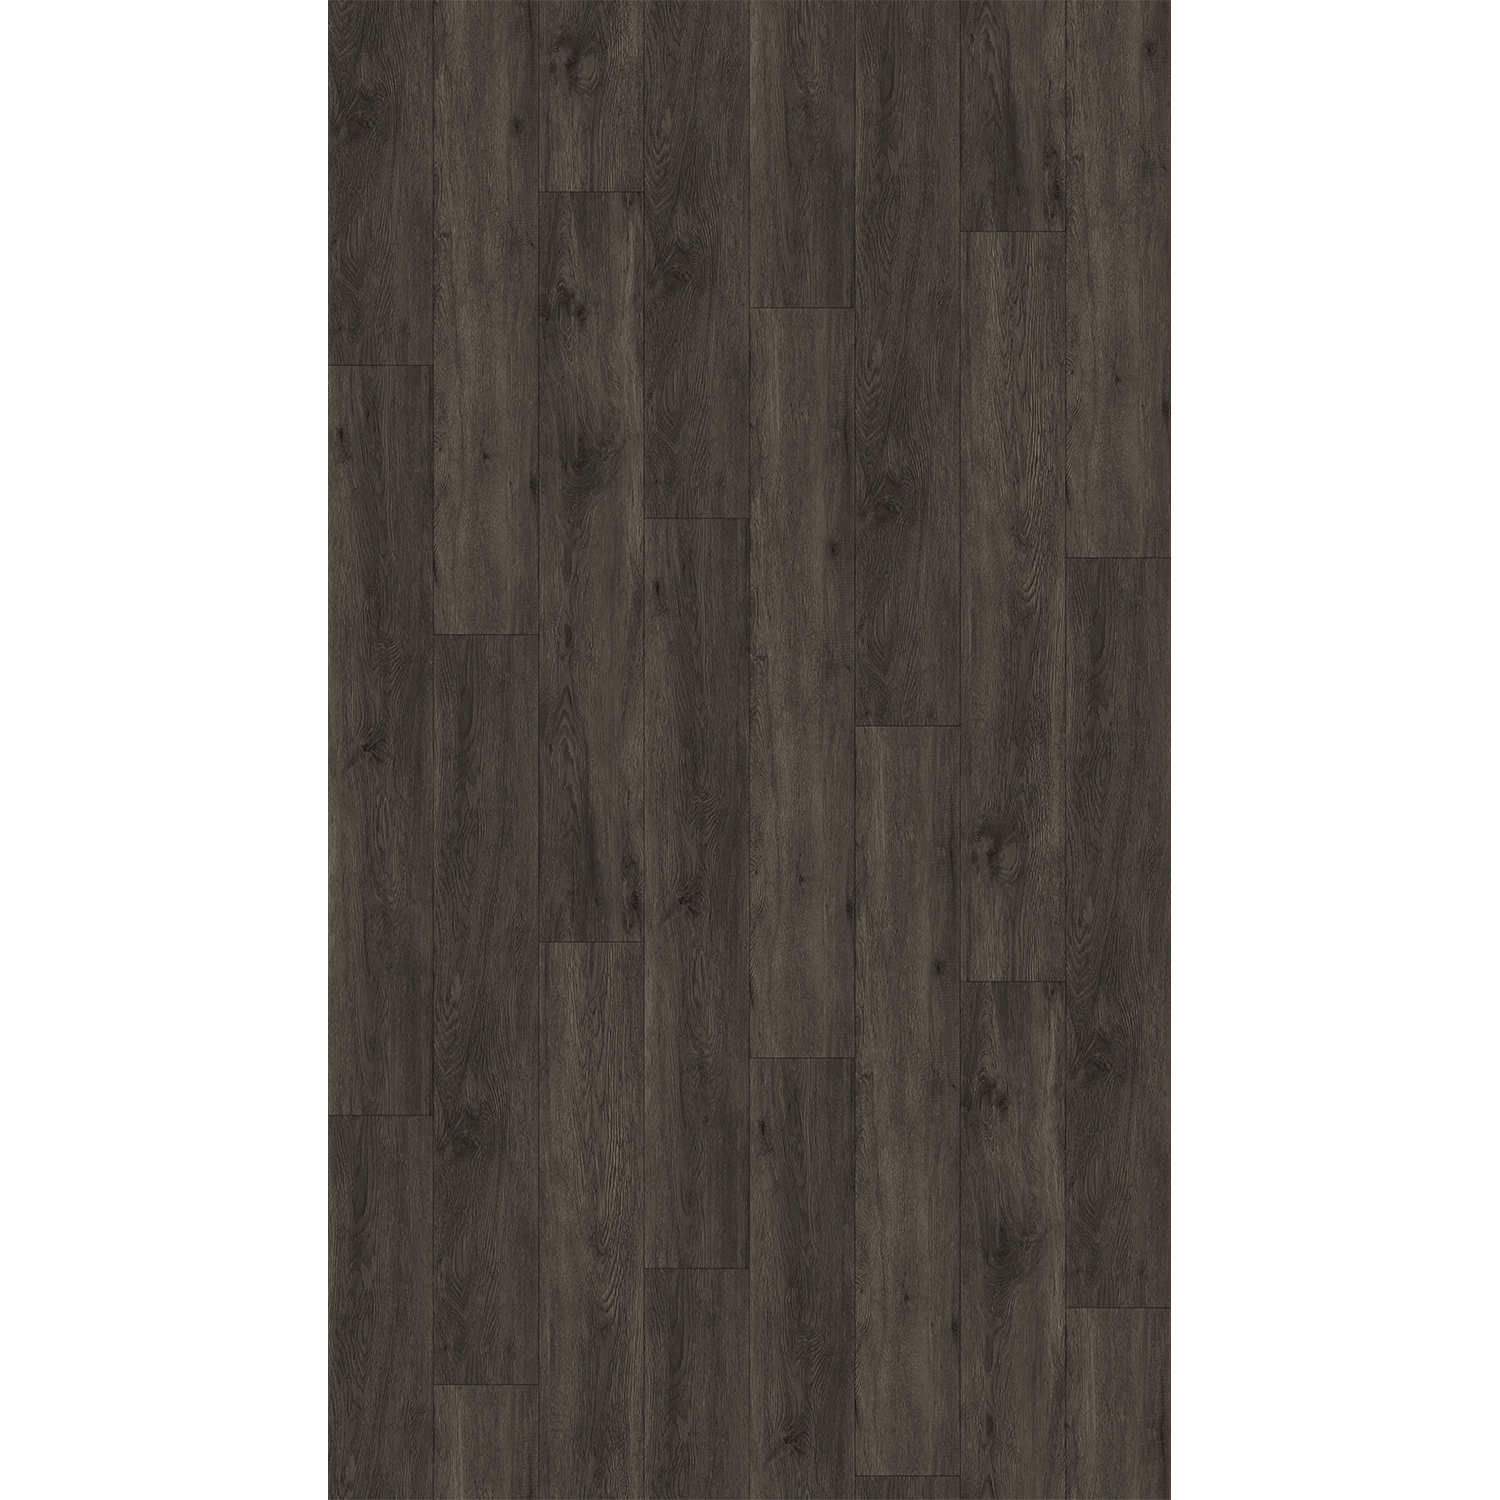 Floorest - 6MM (1.5MM Pad) - 1011 (NEW) - Penthouse Brown - 23.68 SF / Box Vinyl Click